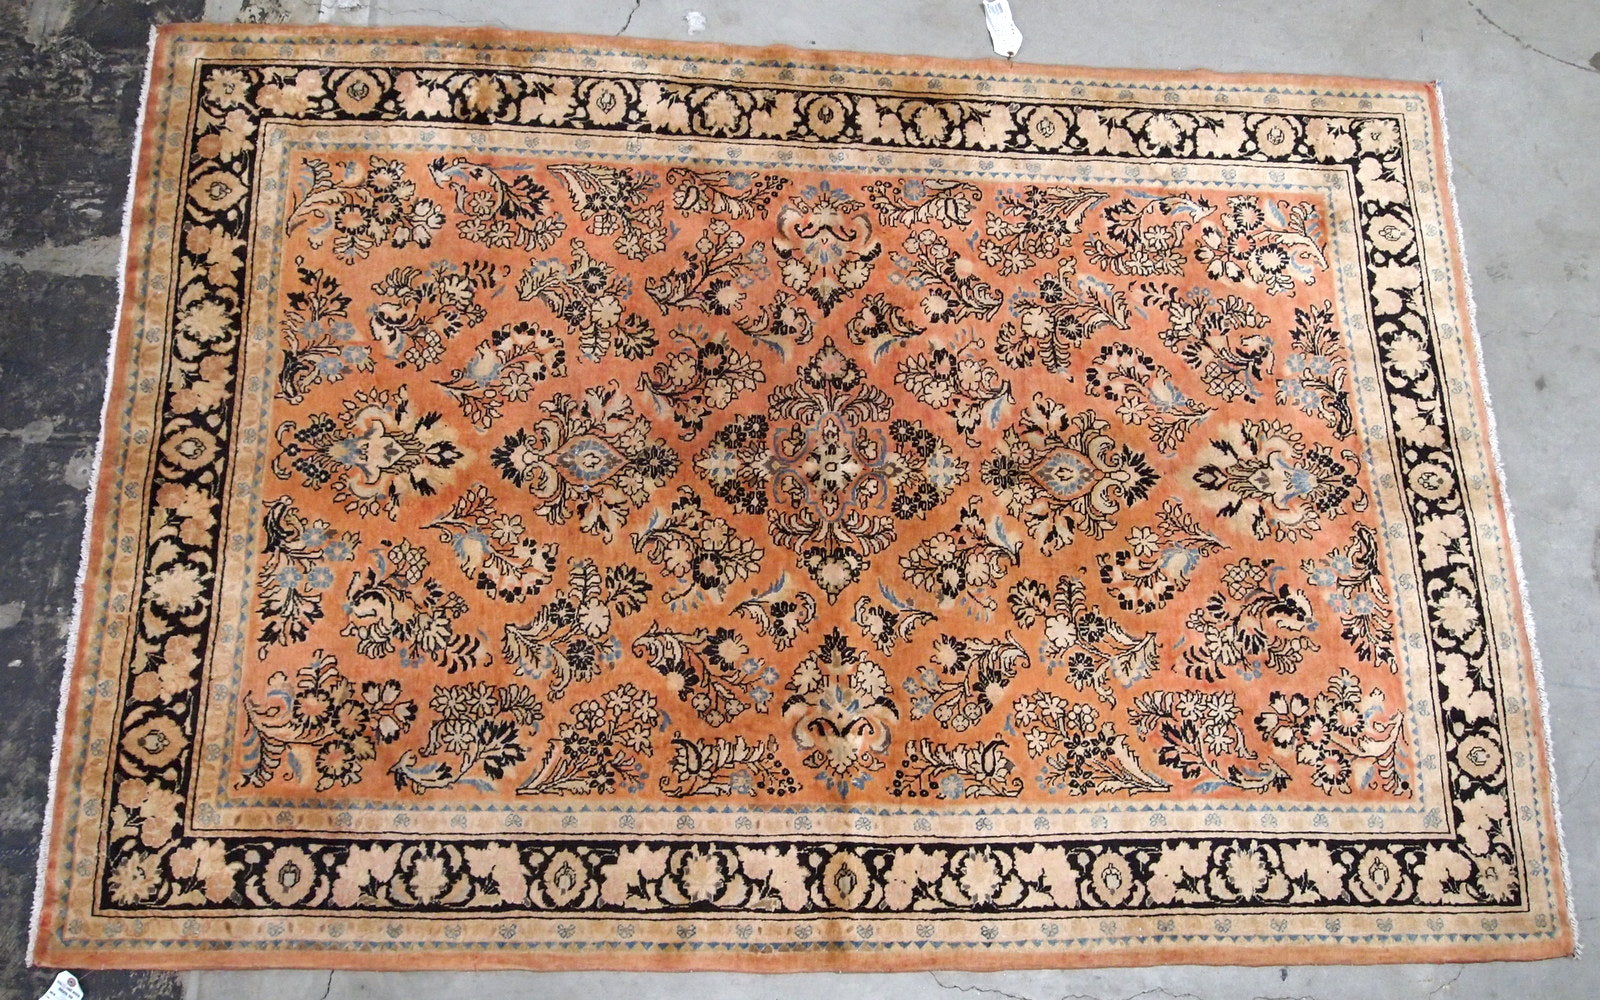 Antique hand made Persian Sarouk rug in salmon shade. The rug is from the beginning of 20th century in original good condition.